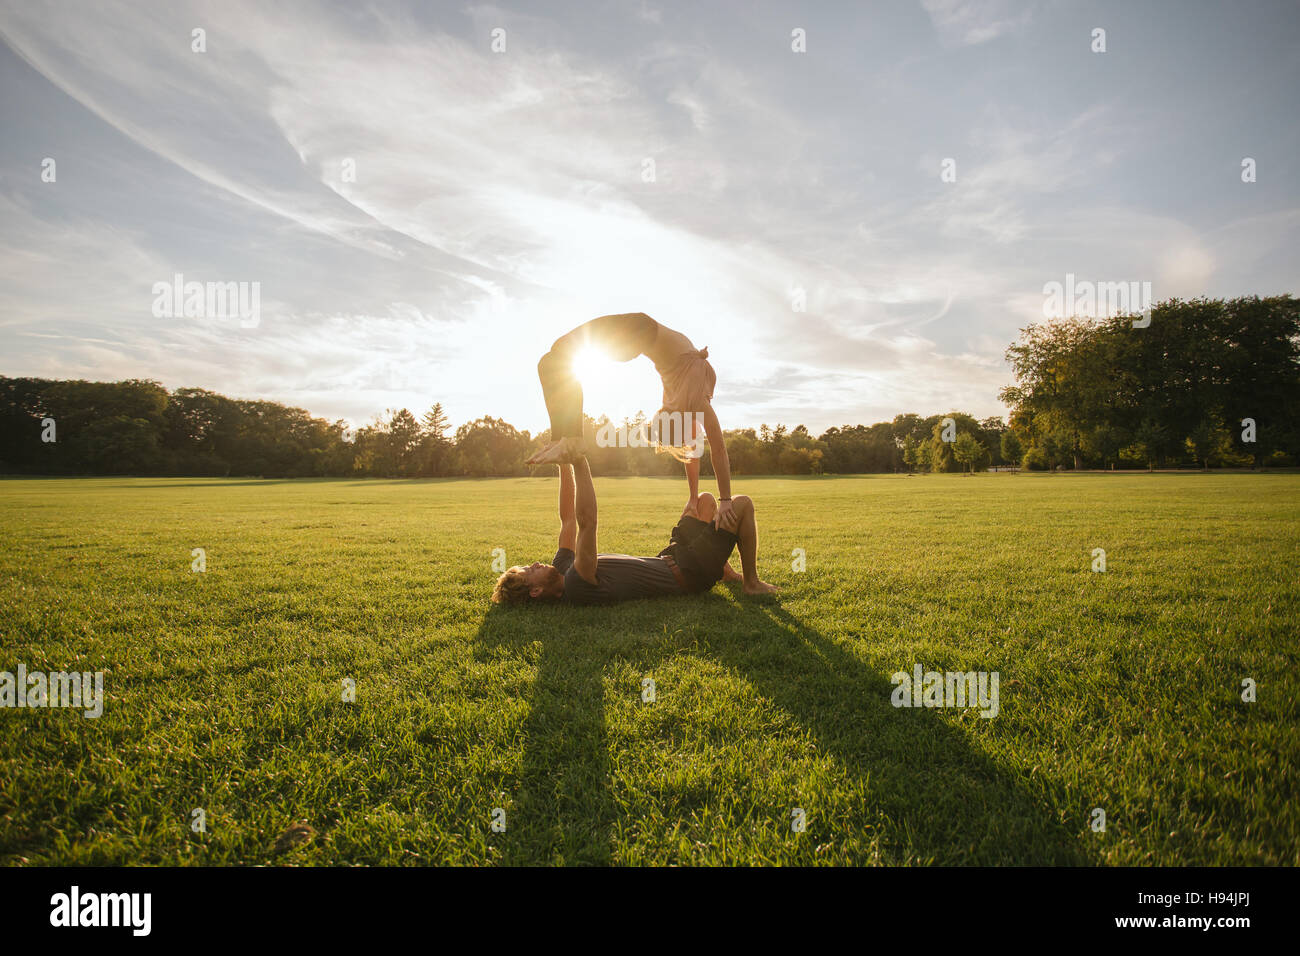 Shot of young couple doing acrobatic yoga on lawn. Young man lifting and balancing woman at the park. Stock Photo